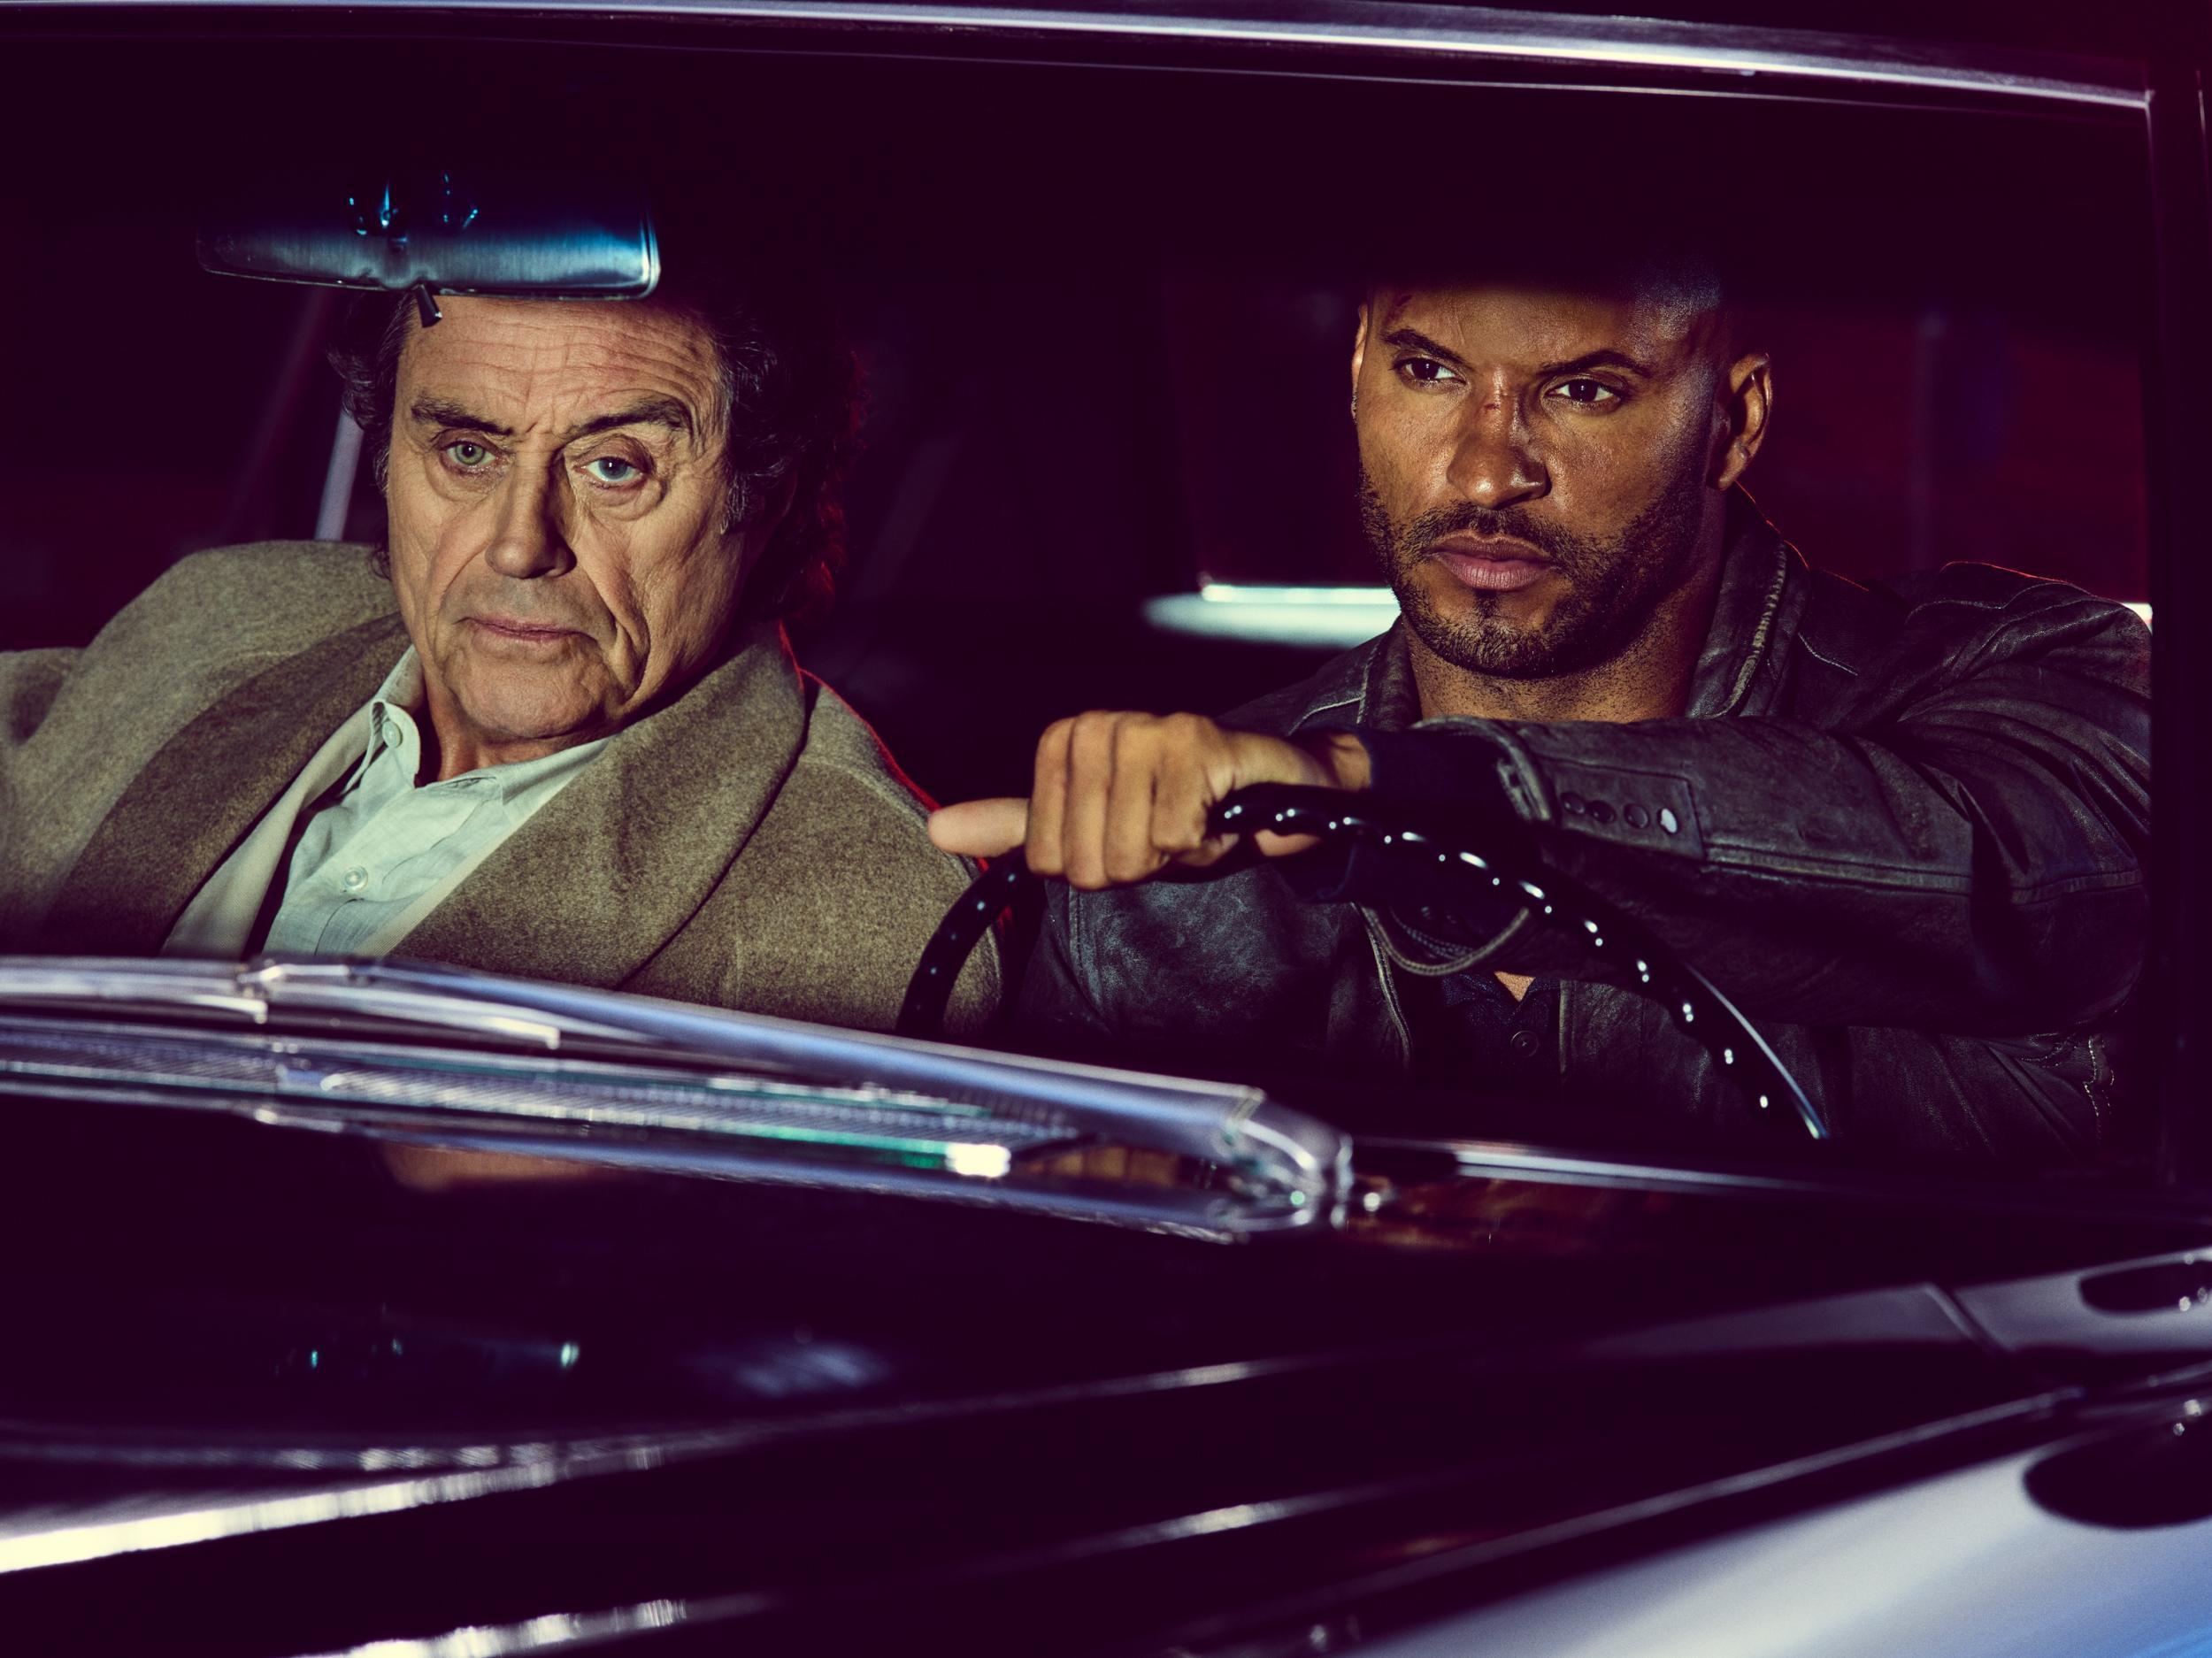 Ian McShane as Mr. Wendesday (left) and Ricky Whittle as Shadow Moon (right)